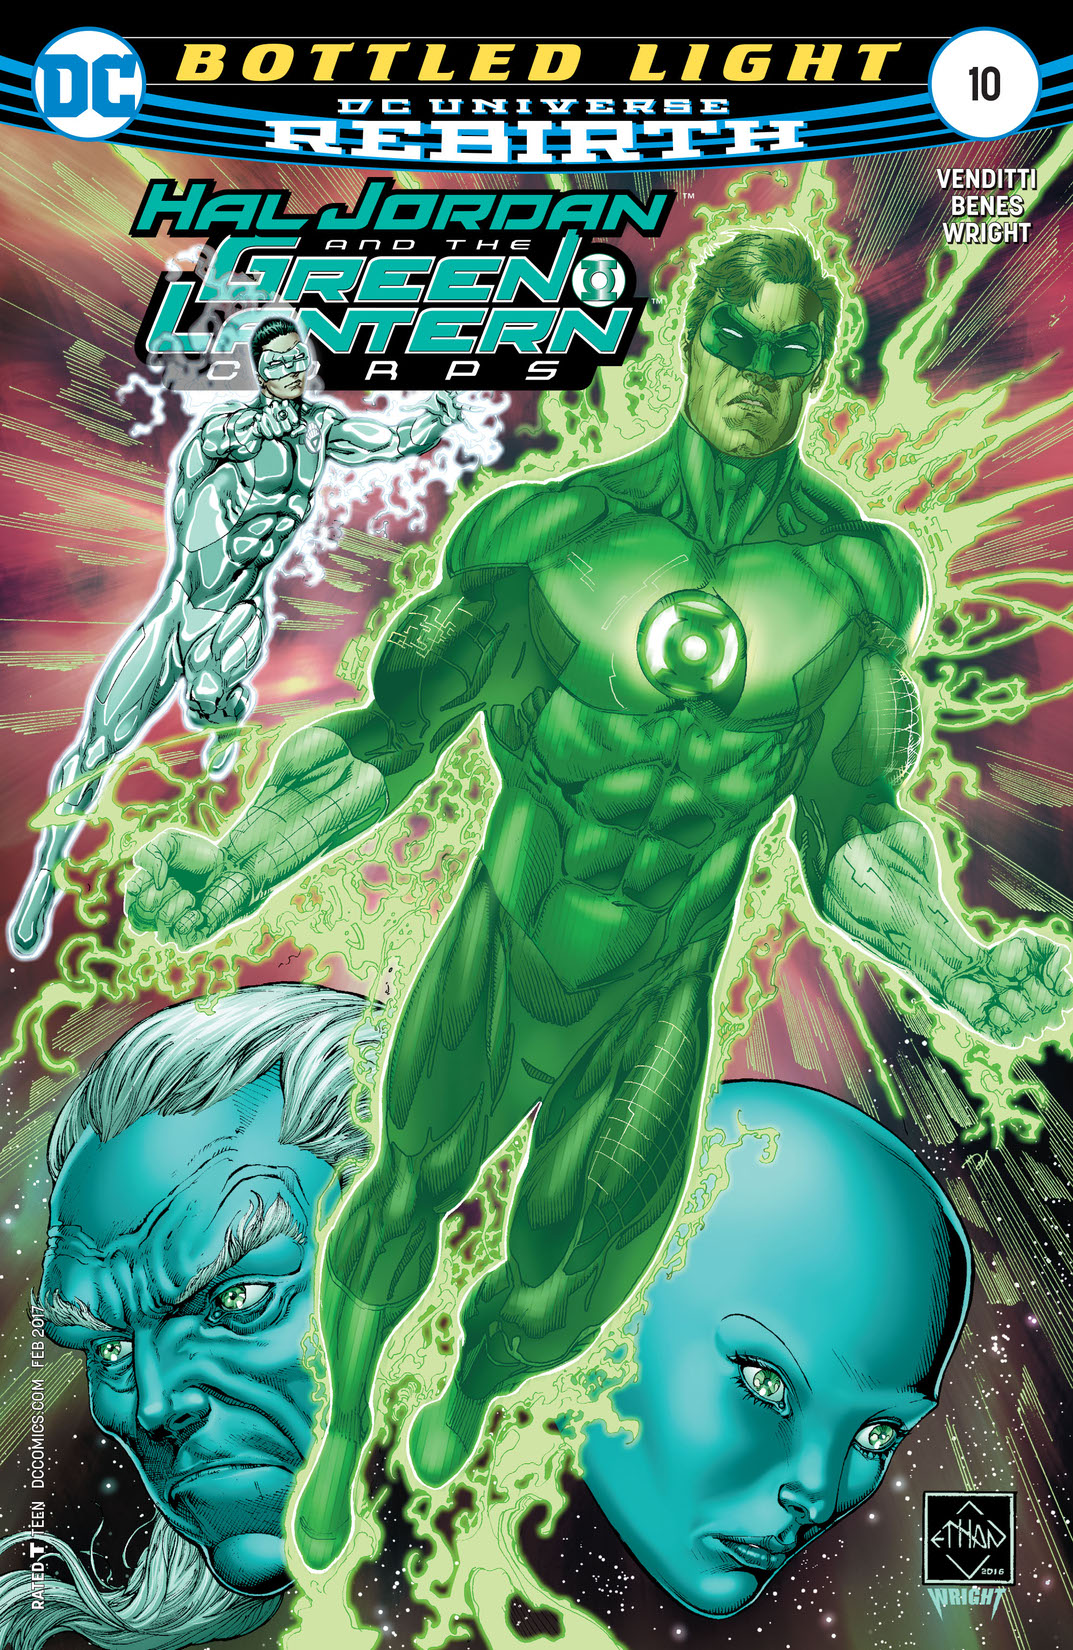 Hal Jordan and The Green Lantern Corps #10 preview images